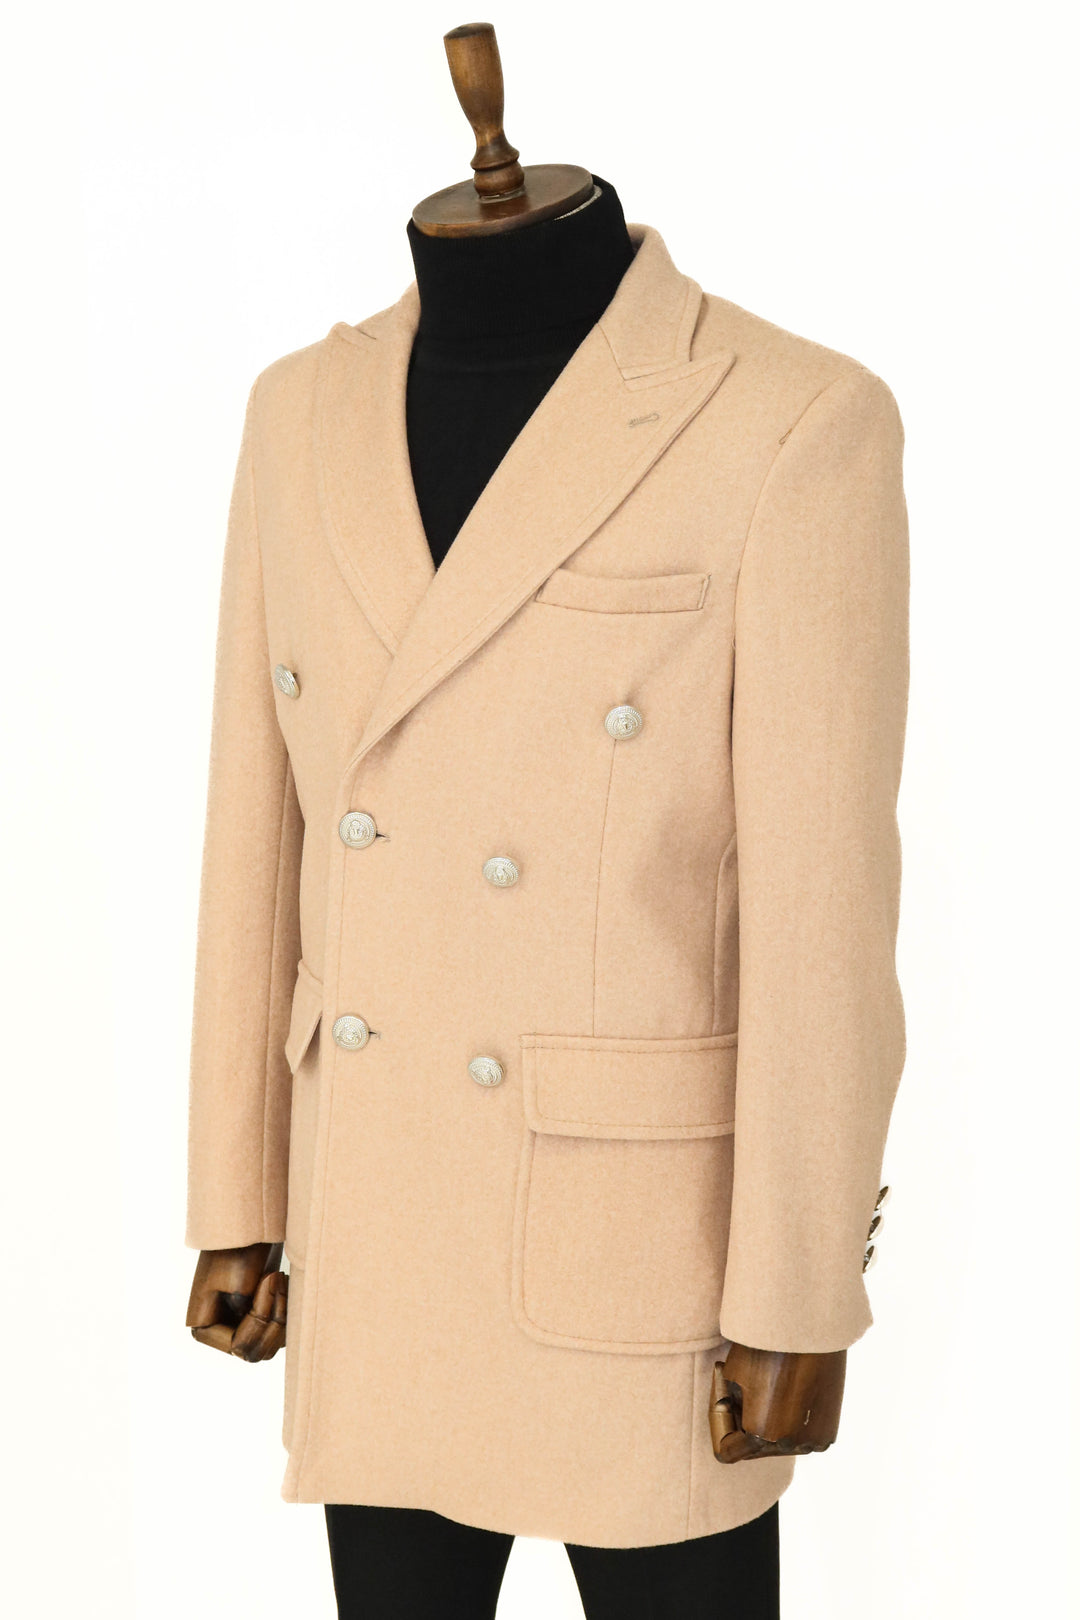 Metal Buttons Wool Cashmere Cream Men Double Breasted Coat - Wessi